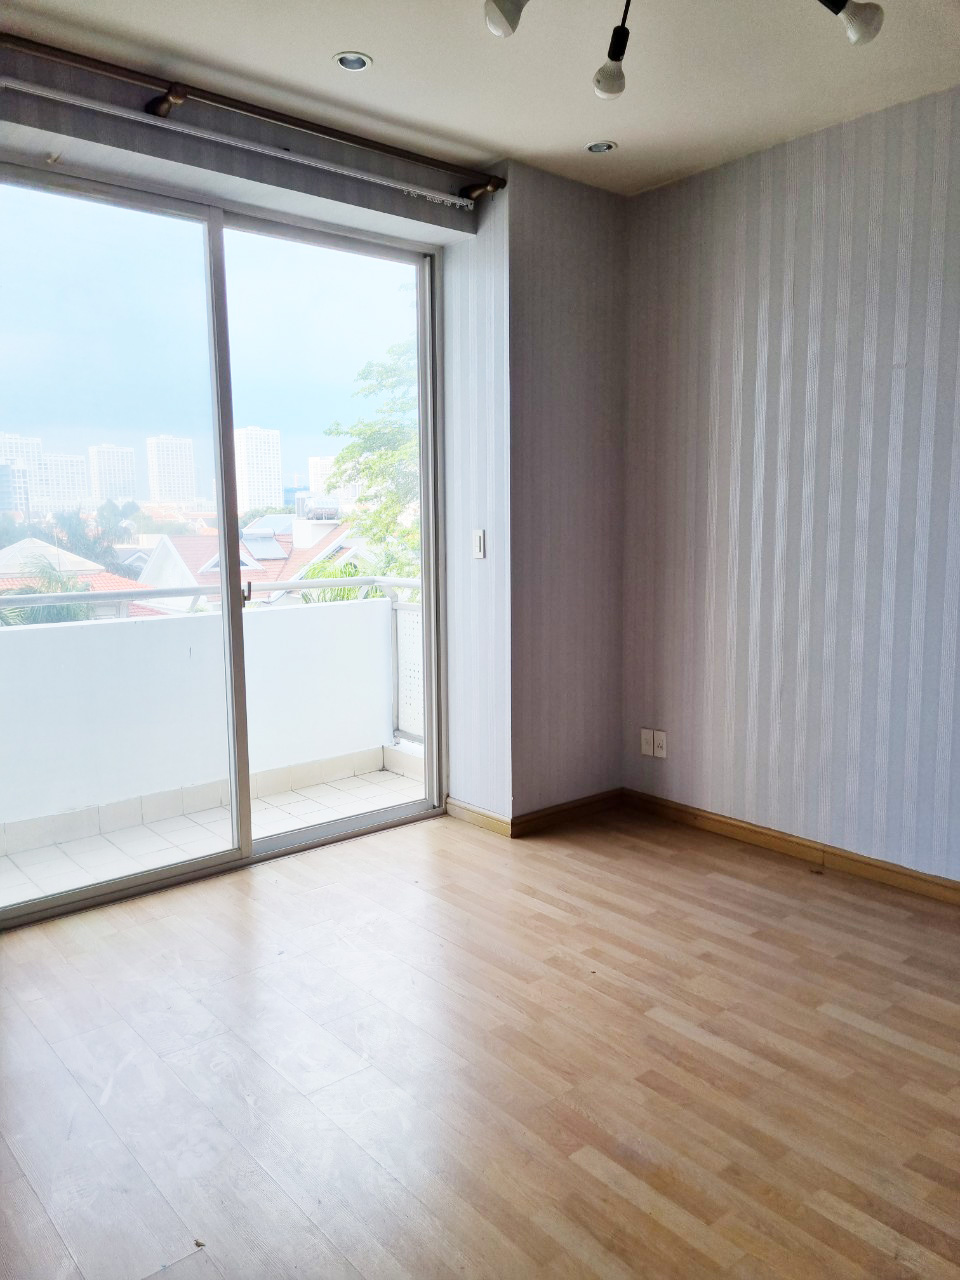 Grand View C apartment large area for rent